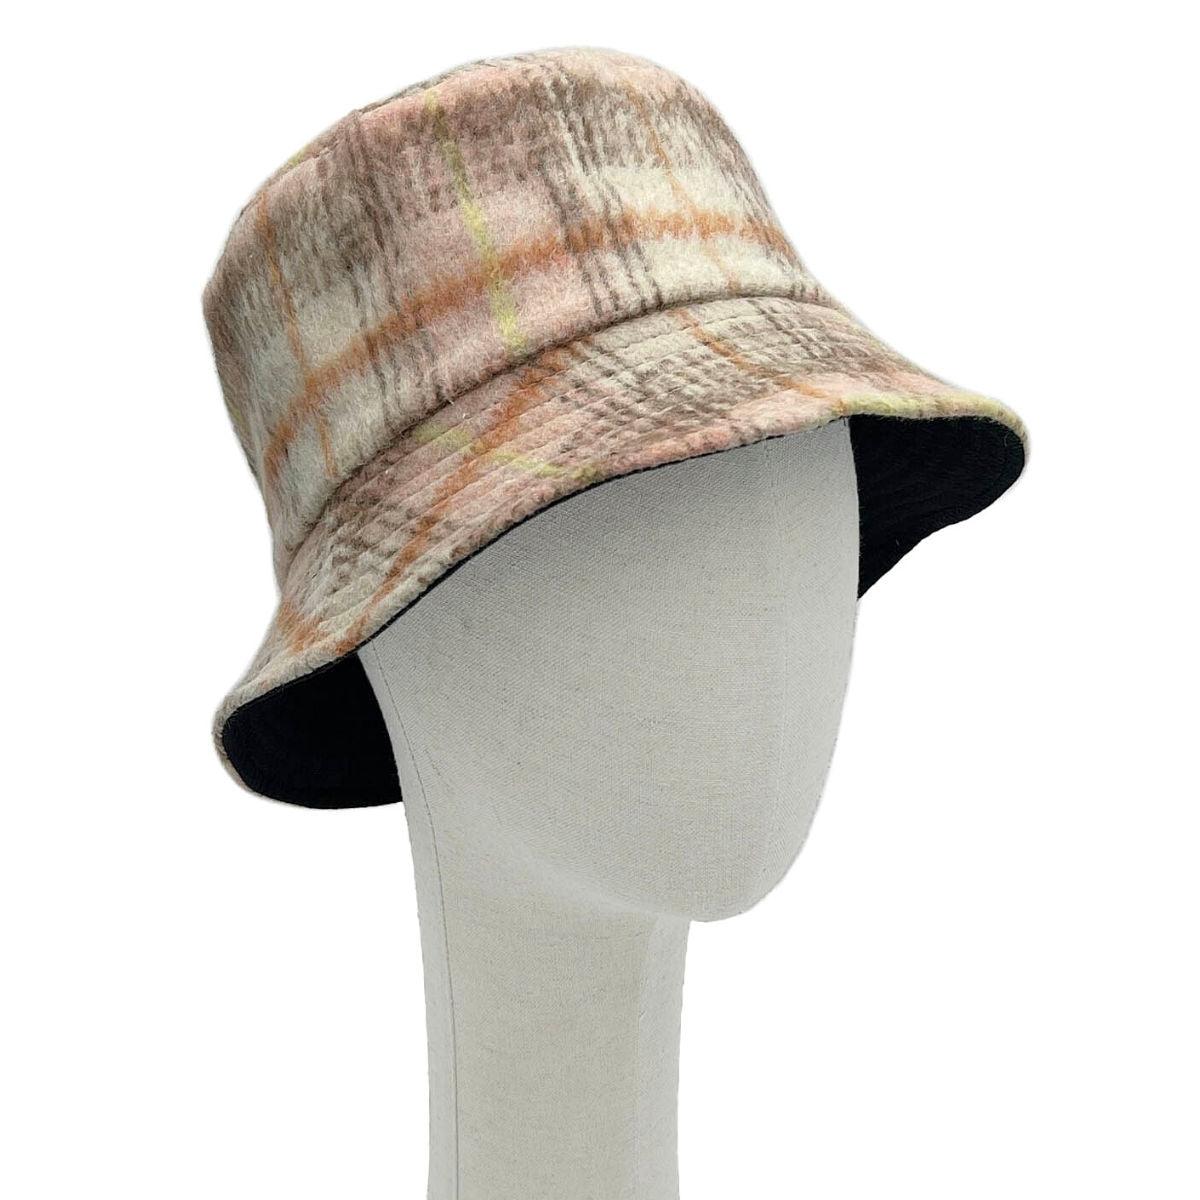 Women's Plaid Bucket Hat Pink/Multi Fashionable and On-Trend